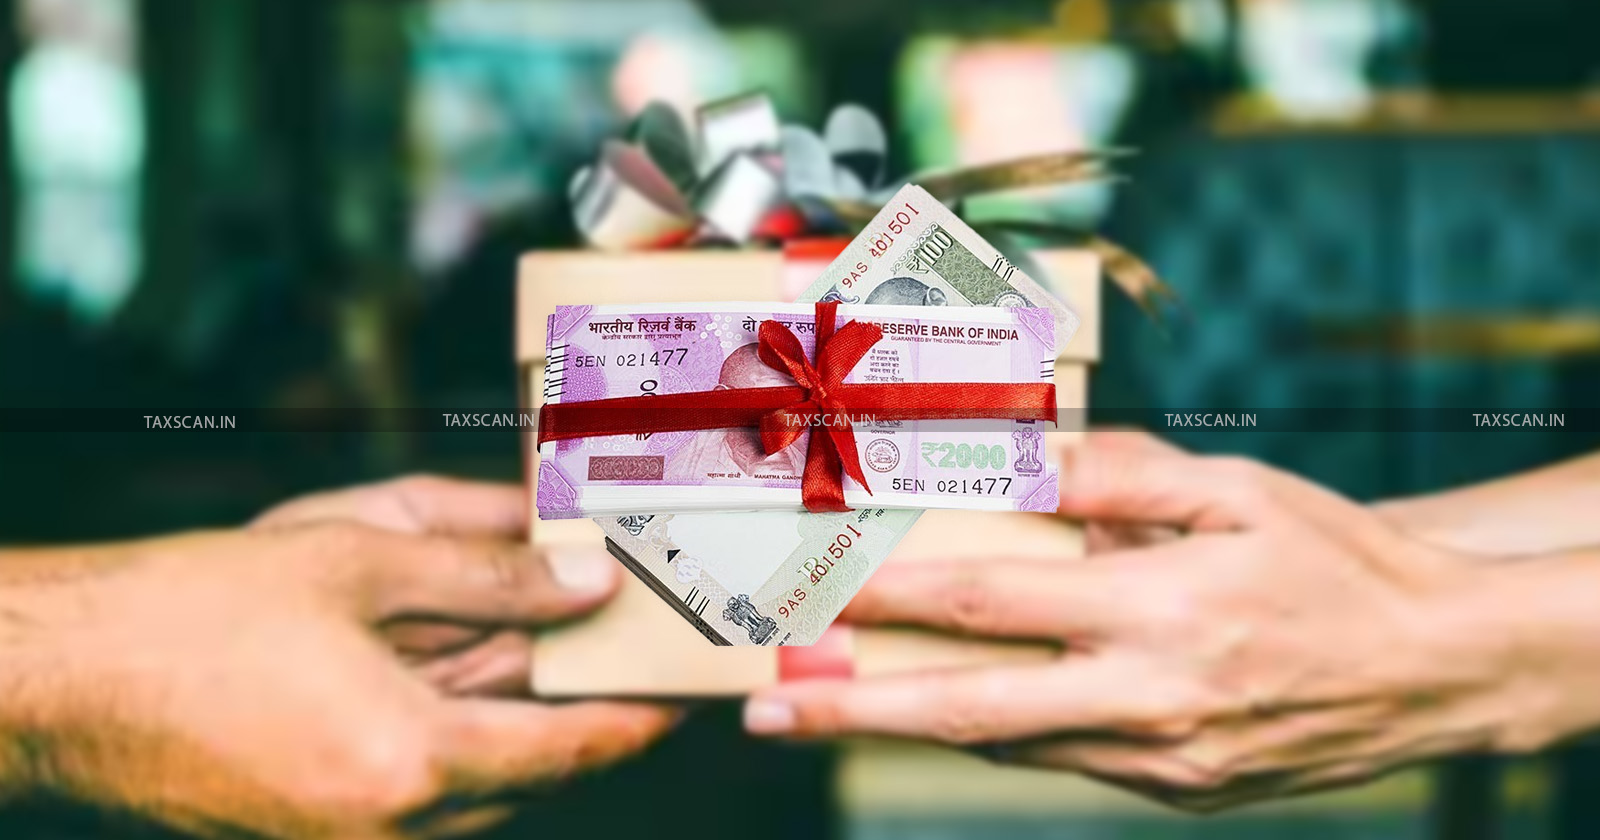 Tax Implications of Cash Gifts - Tax-Free Gift Limits from Relatives - Cash Gifts and Tax Liability Guide - Exemption Rules for Family Cash Gifts - Taxscan